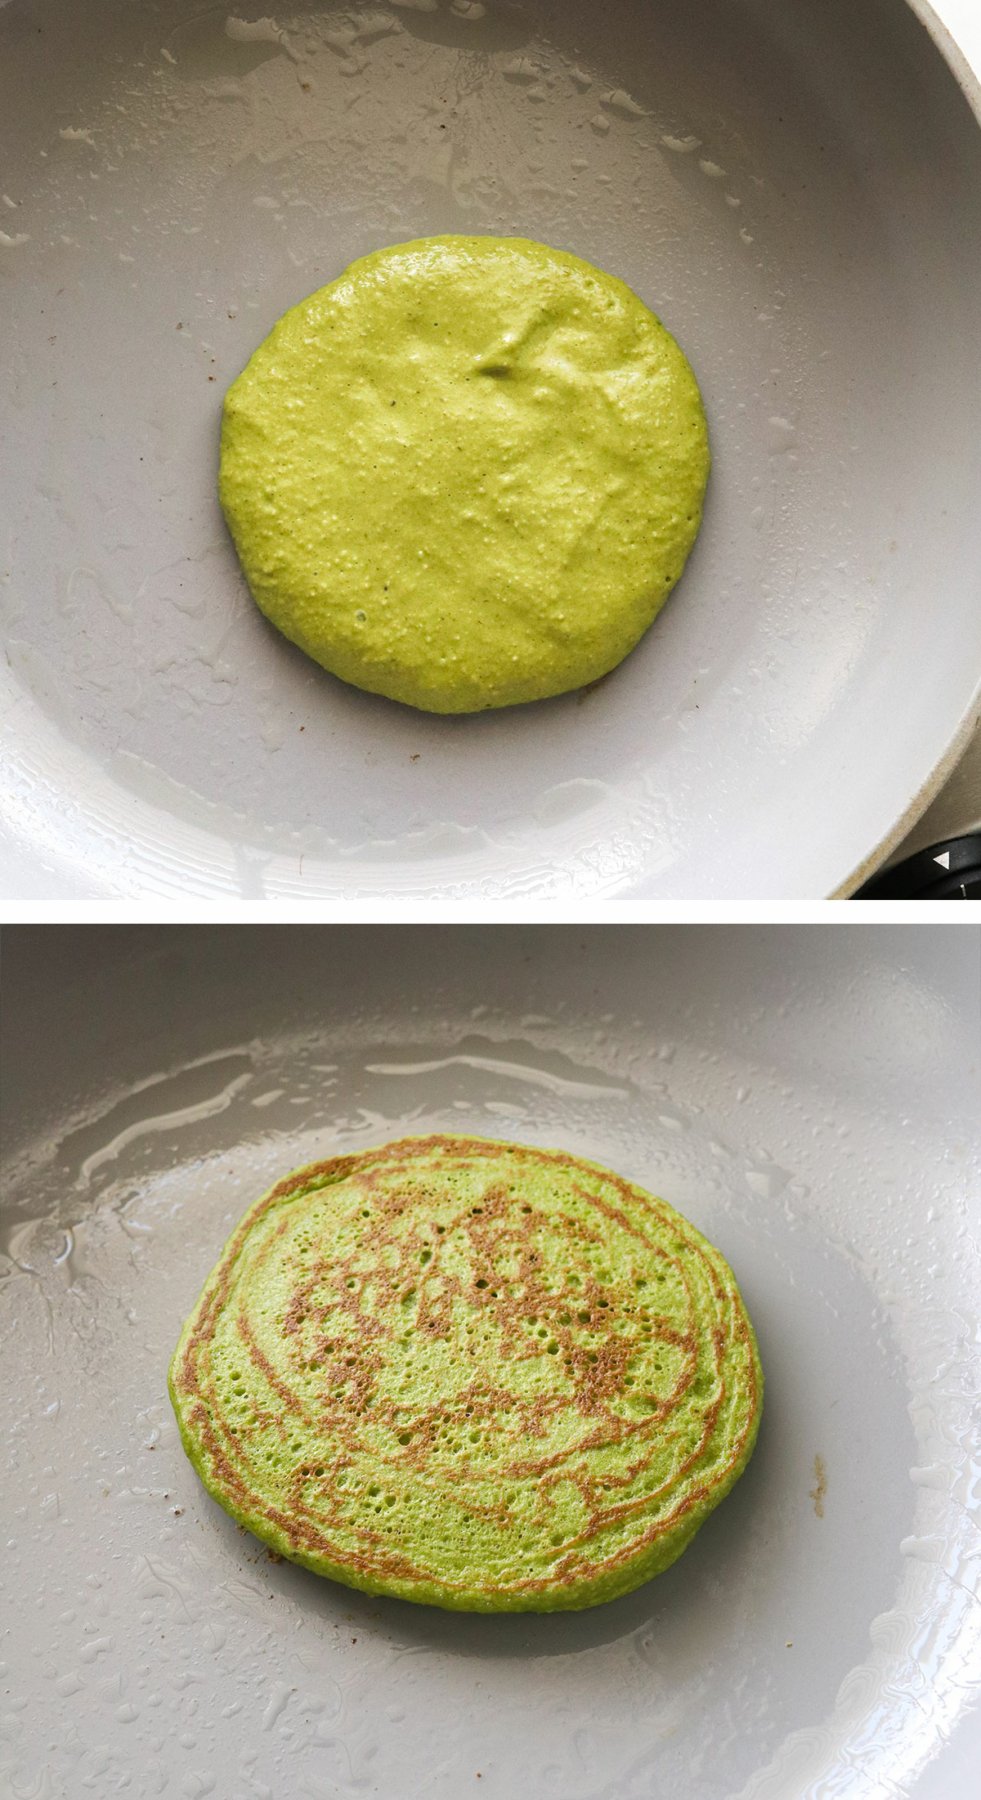 spinach pancakes before and after flipping on skillet.